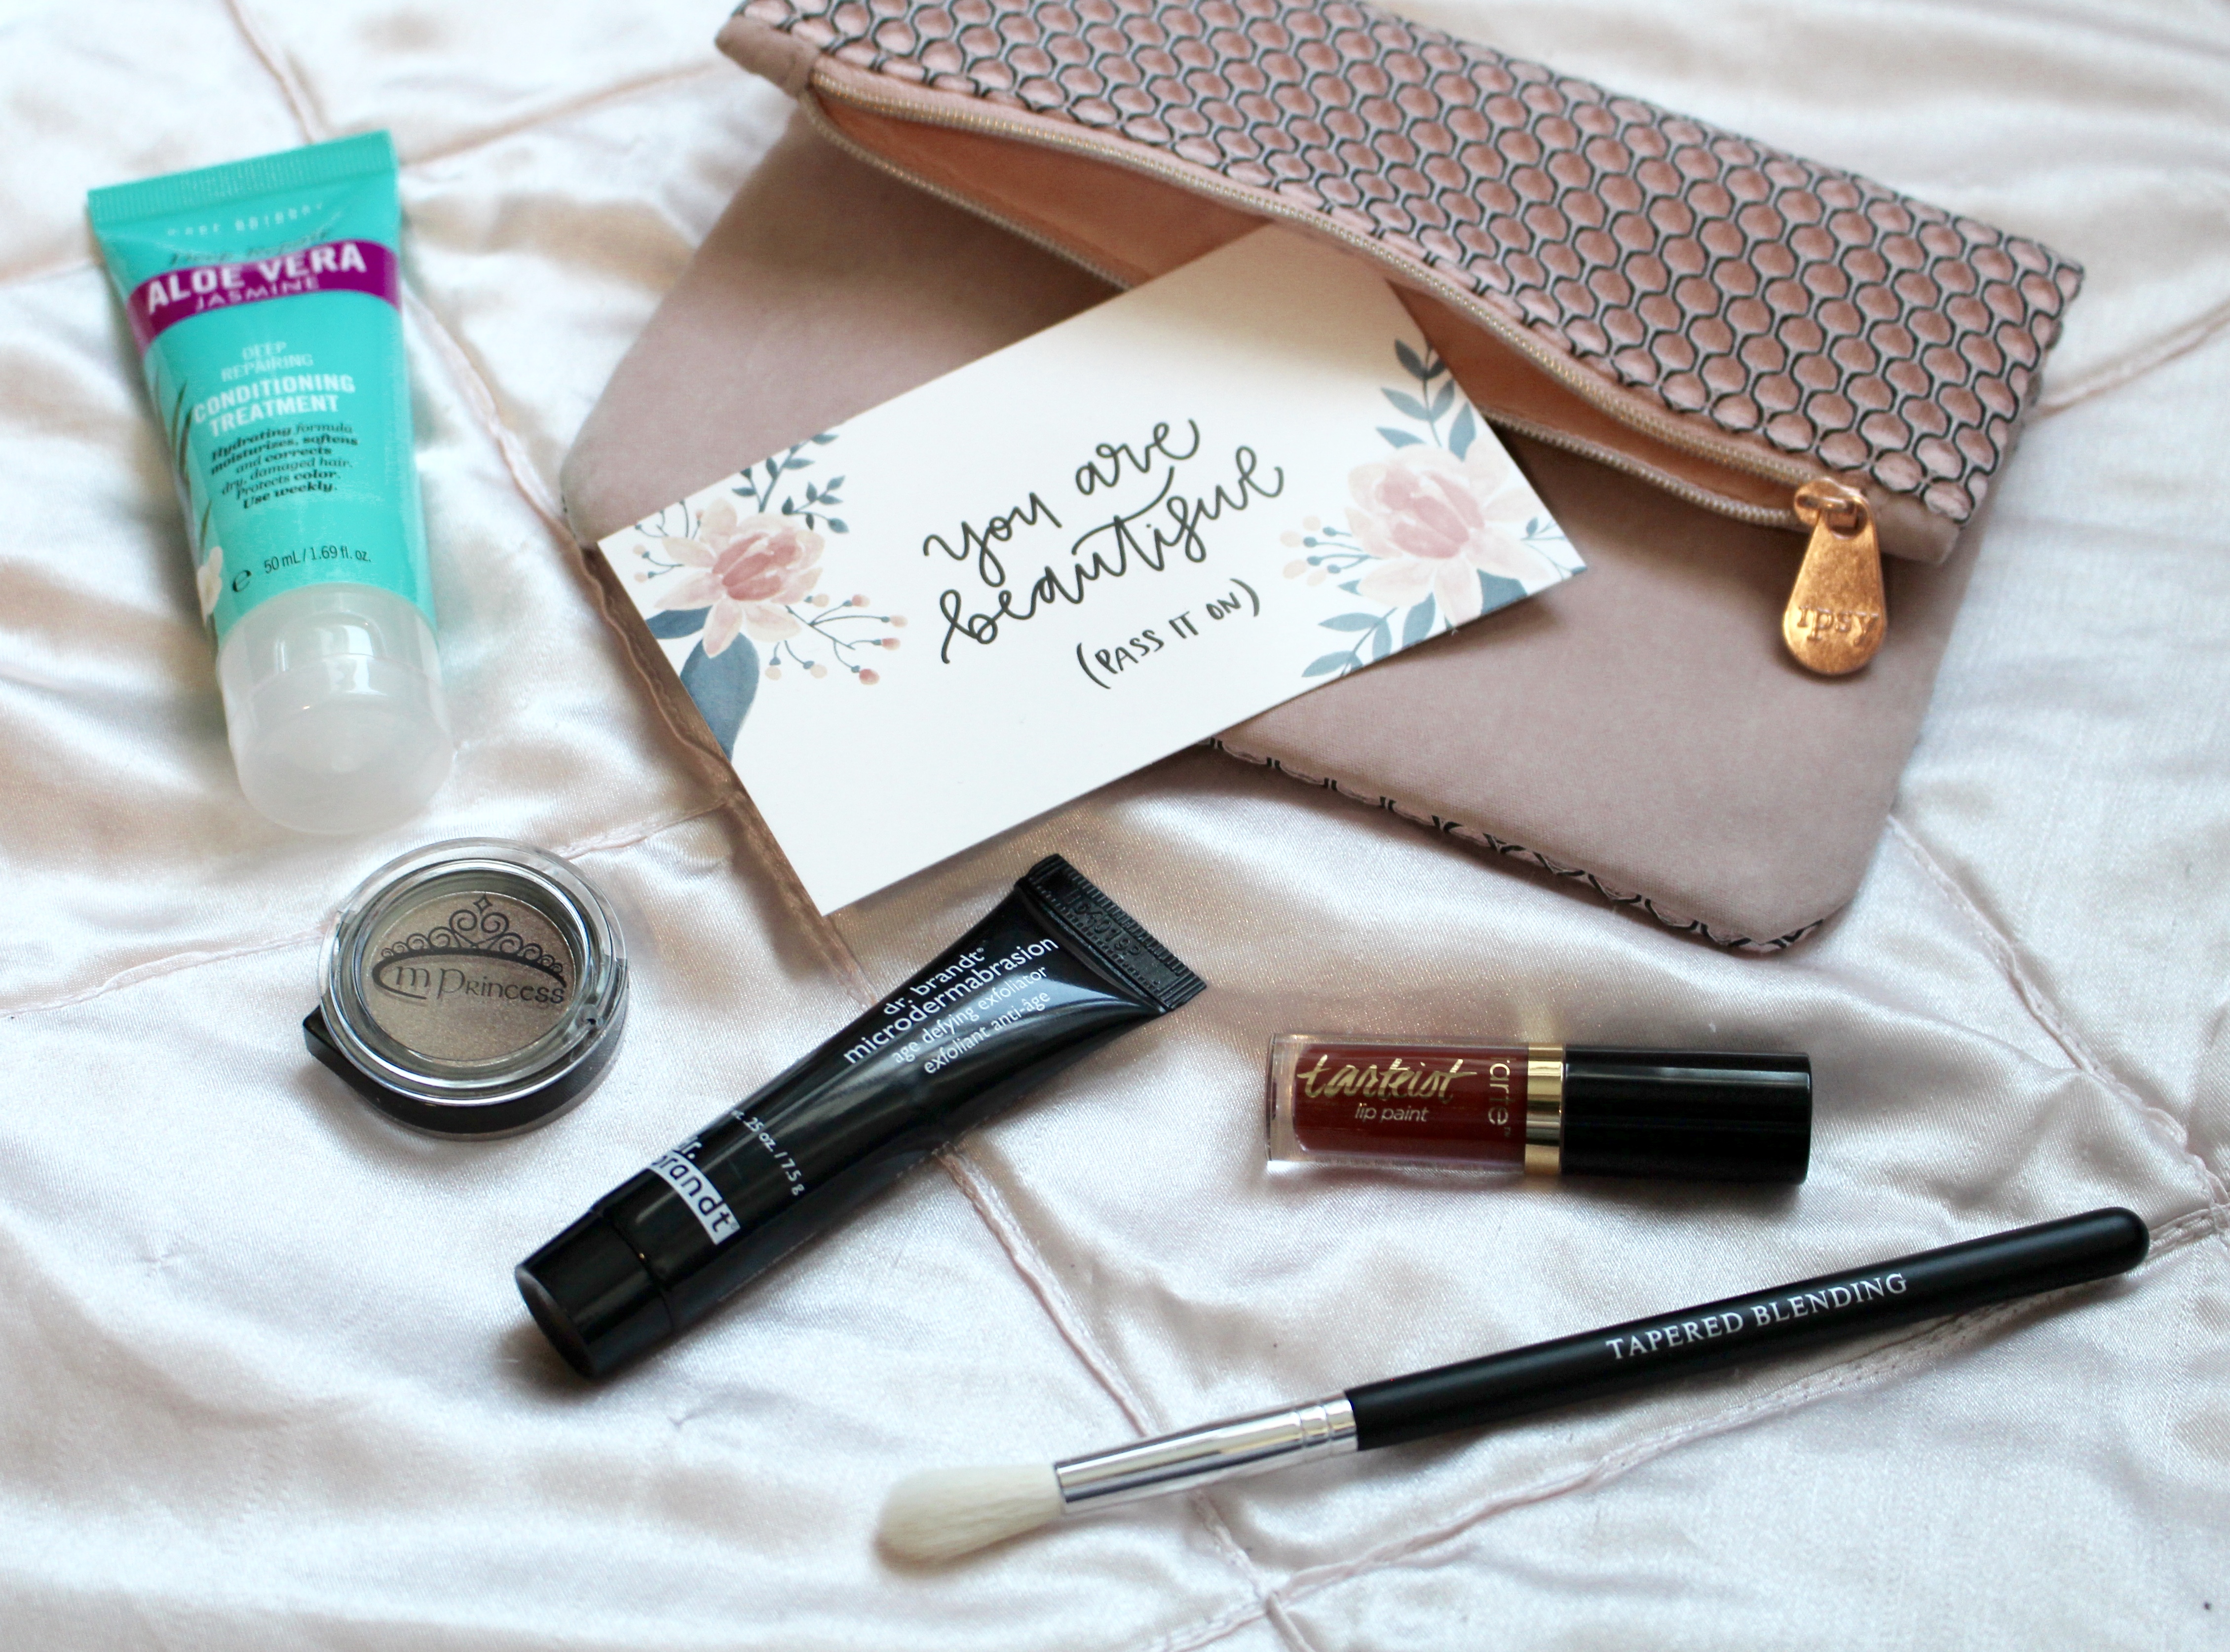 Ipsy Review #21: “Très Jolie” March Glam Bag